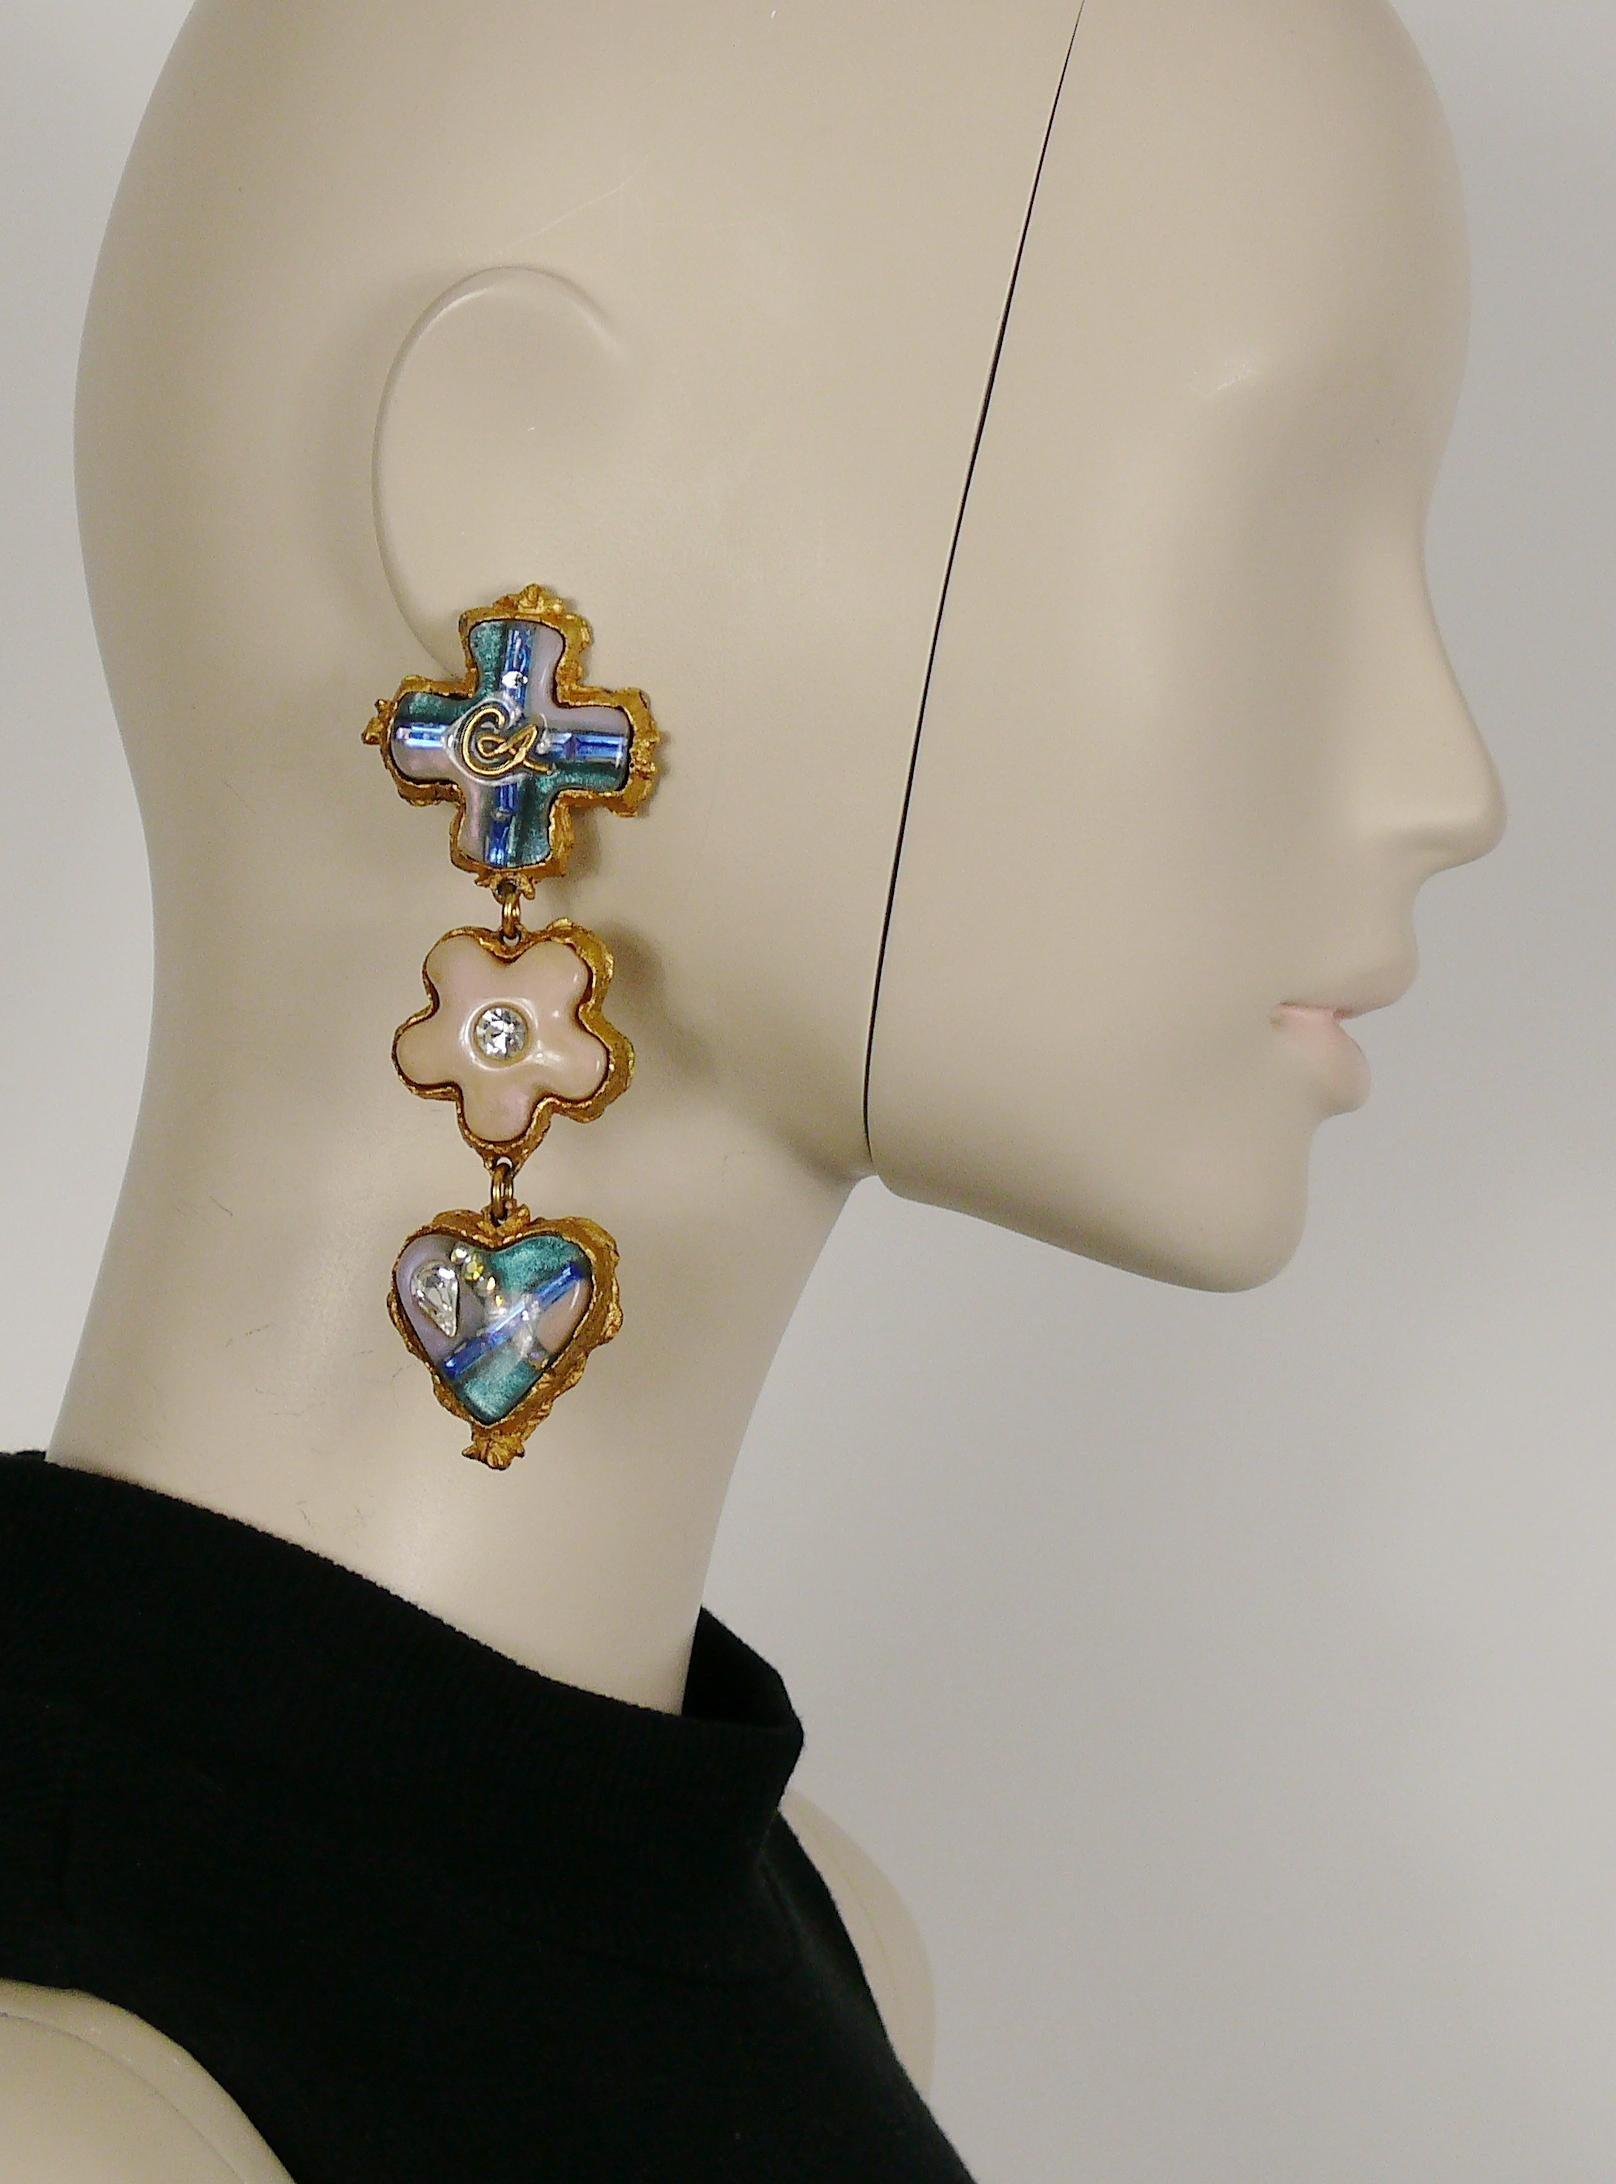 CHRISTIAN LACROIX gold toned dandling earrings (clip-on) featuring blue/pink resin inlaid heart, star and heart with crystal embellishement.

Marked CHRISTIAN LACROIX CL Made in France.

Indicative measurements : max. length approx. 10.5 cm (4.13